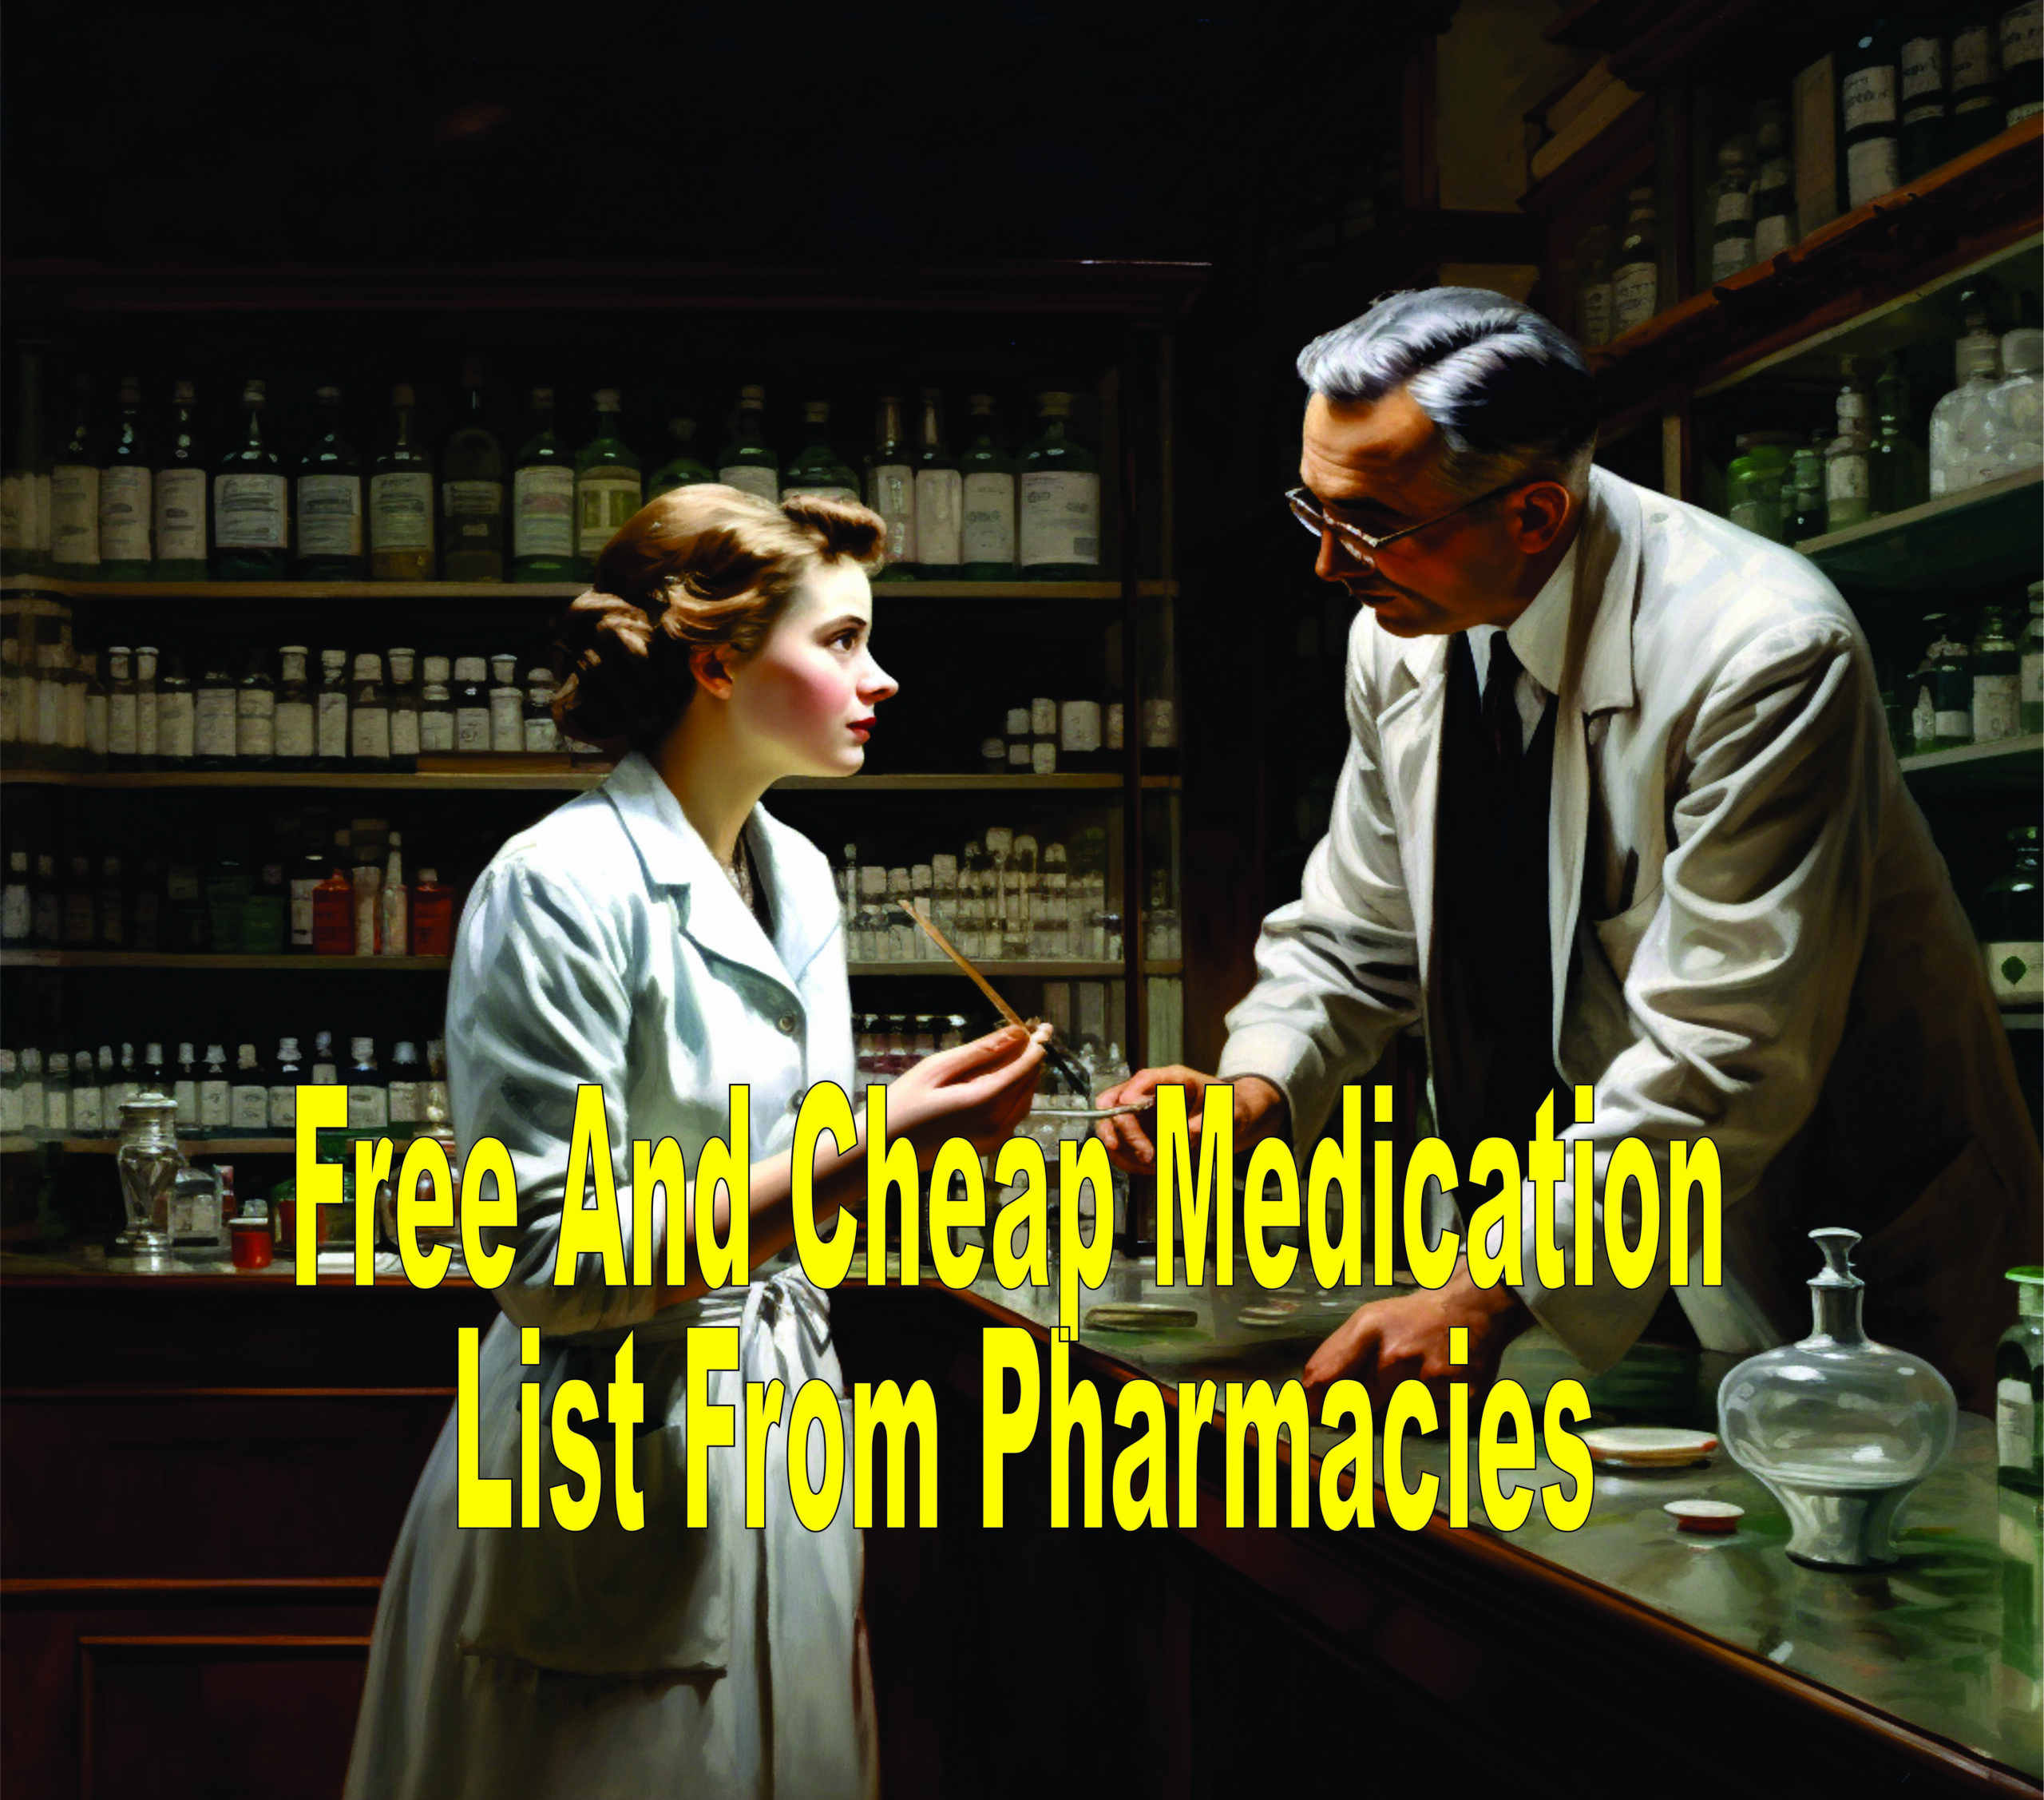 Free And Cheap Medication List From Pharmacies